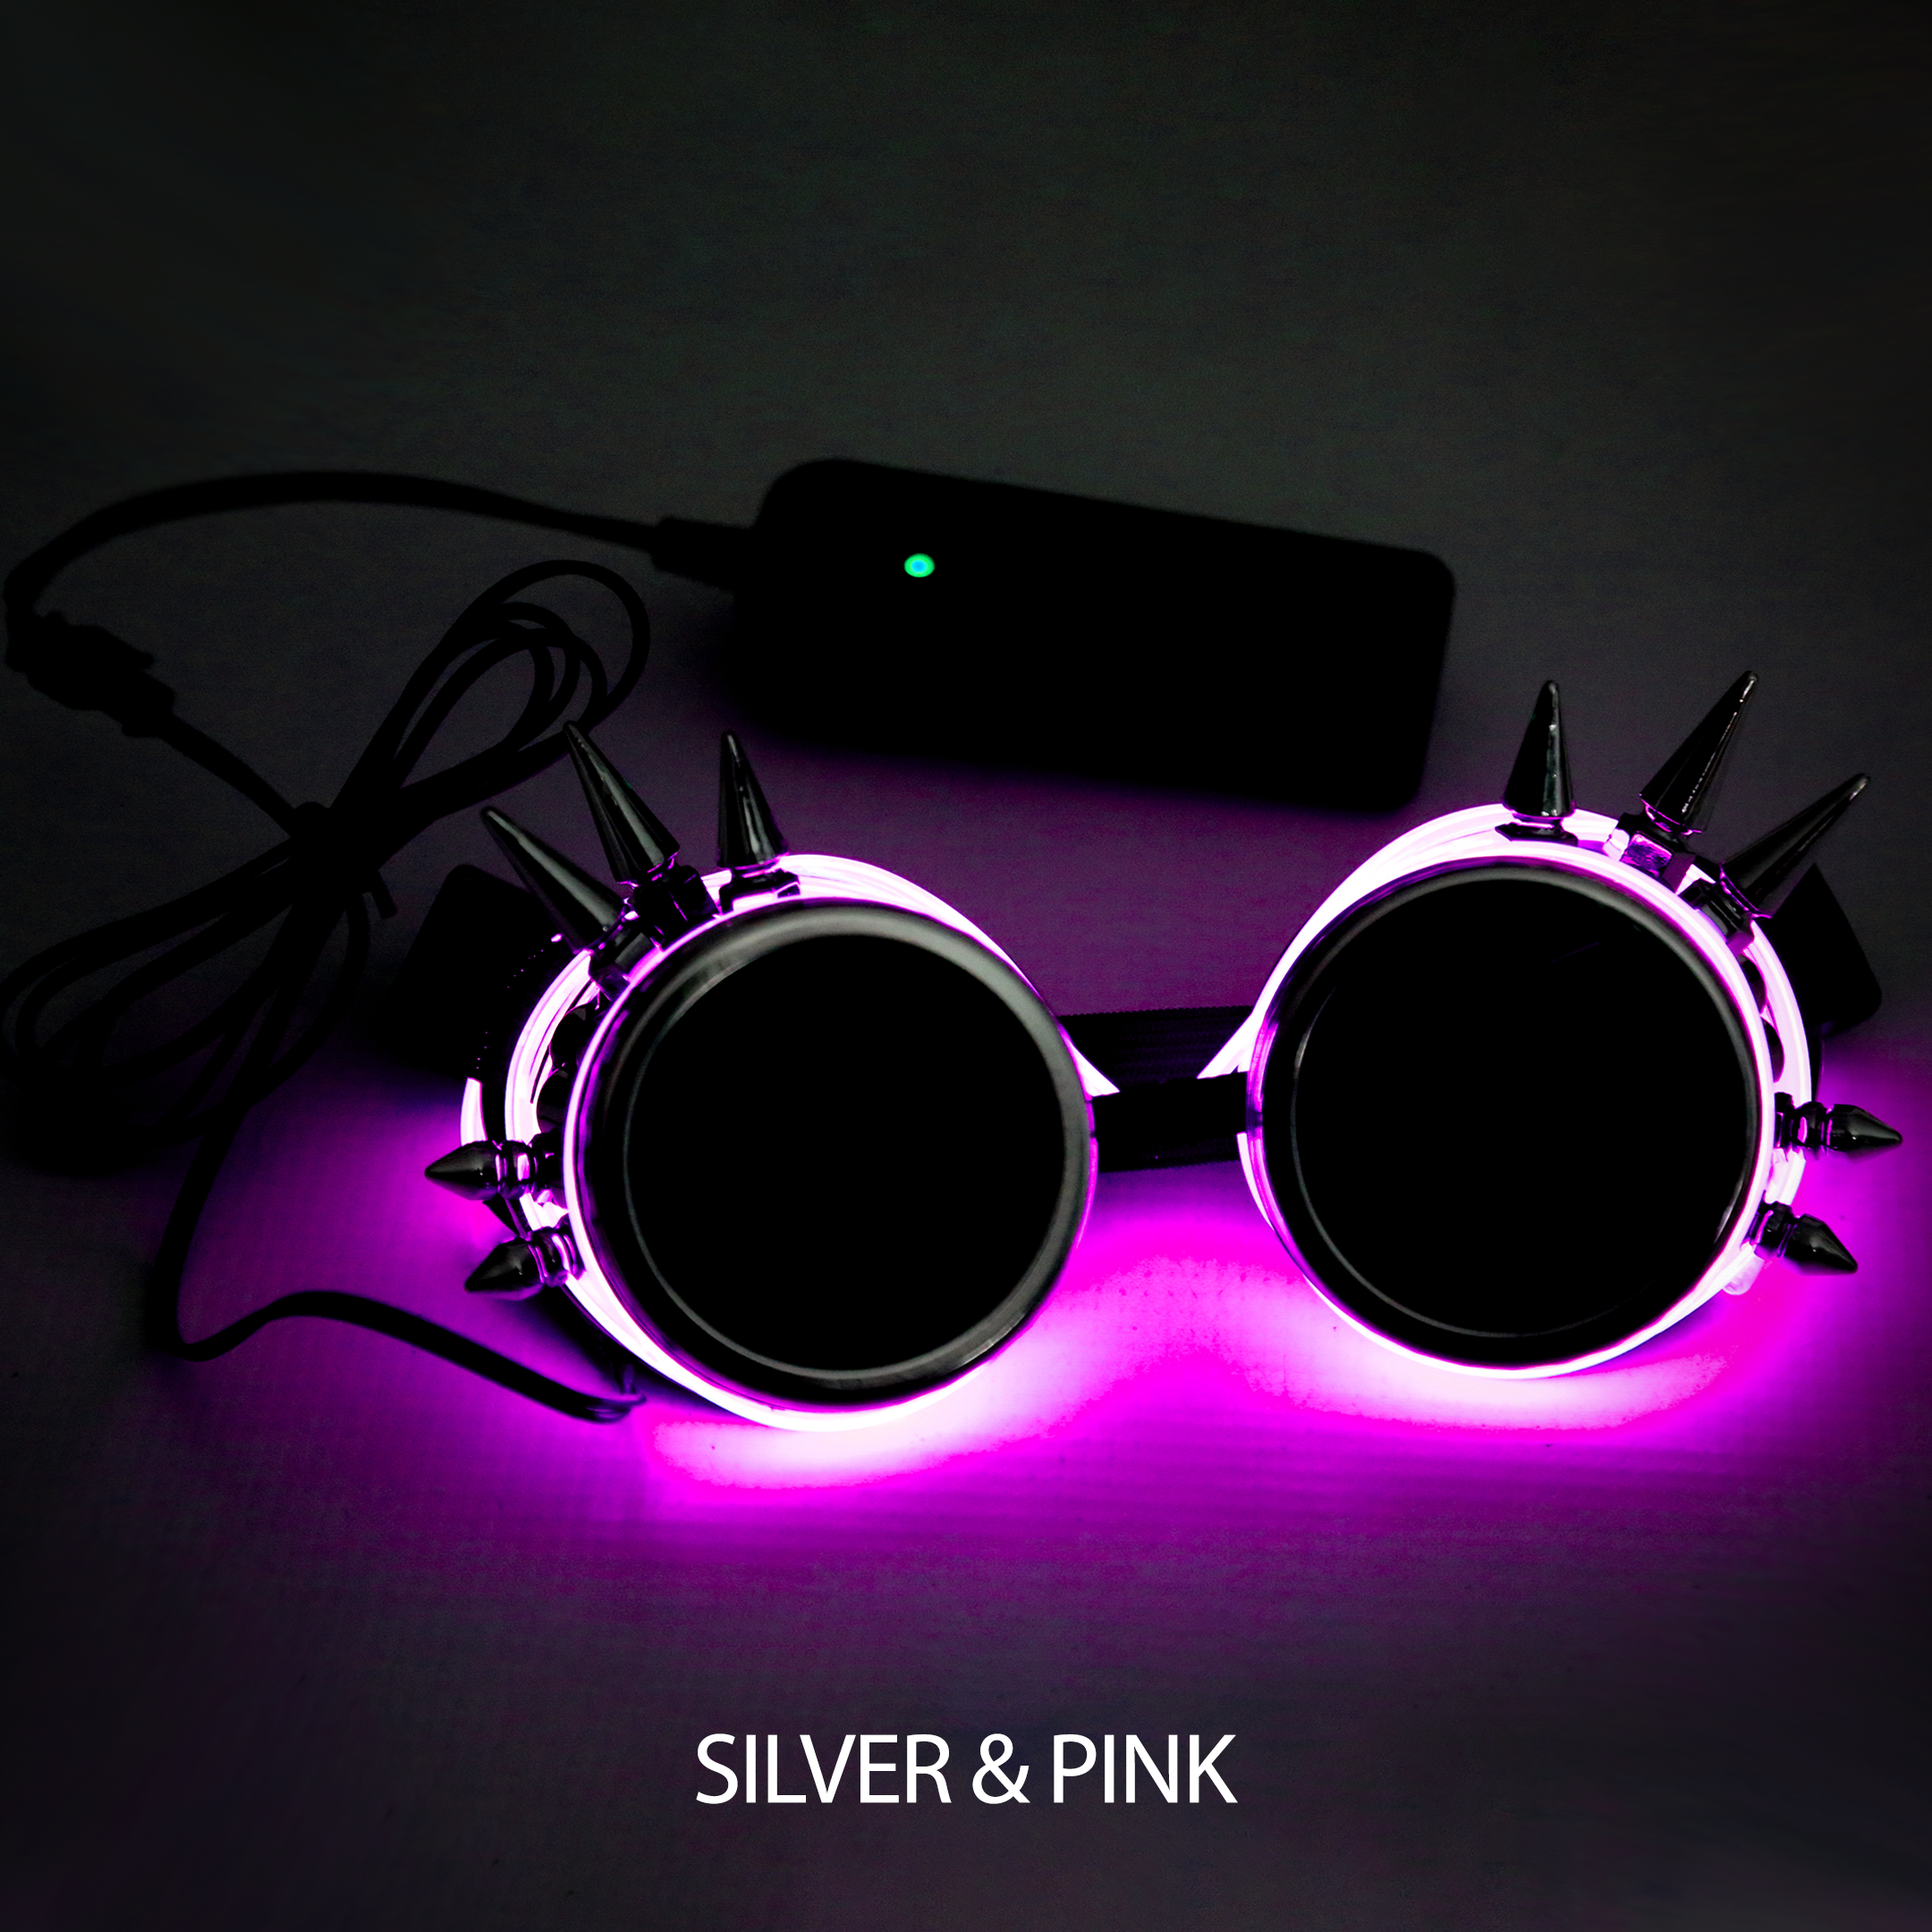 silver & pink LED steampunk glasses Electro Glow | South Africa's Best LED Festival Gear & Rave Clothes - festivals outfits, clothes festival, festival clothing south africa, festival ideas outfits, festival outfits rave, festival wear, steam punk goggle, rave glasses, outfit for a rave, kaleidoscope glasses, diffraction glasses, clothes for a rave, rave sunglasses, spectral glasses, rave goggles, clothes for a rave, rave clothing south africa, festival wear south africa, accessories festival